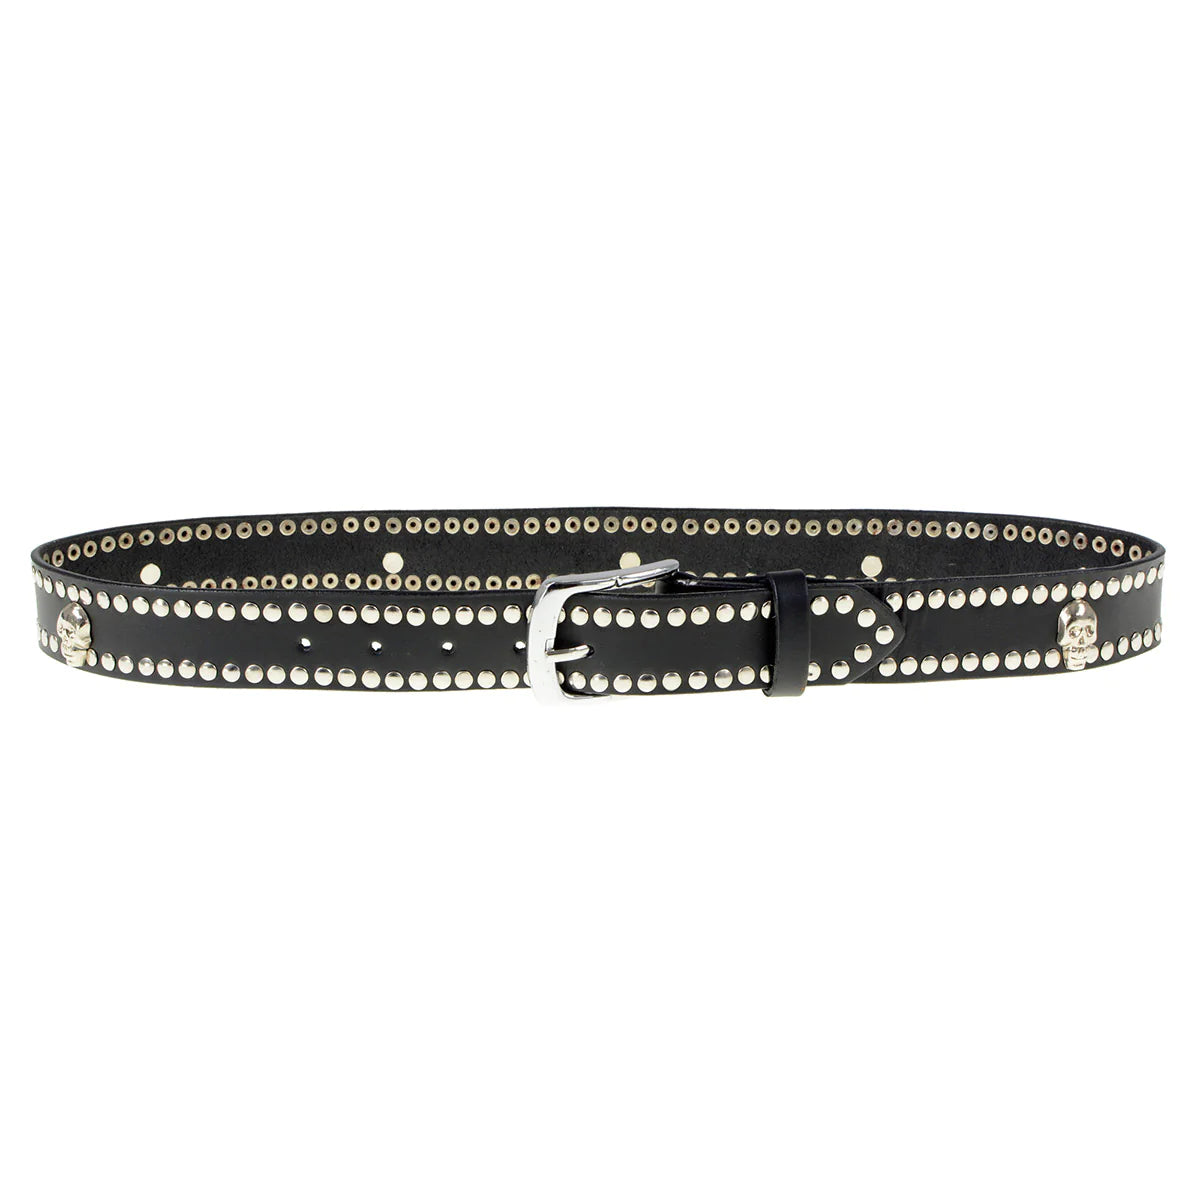 Men's Black Studs and Skulls Genuine Leather Belt for Biker with Buckle - 1.5 inches Wide